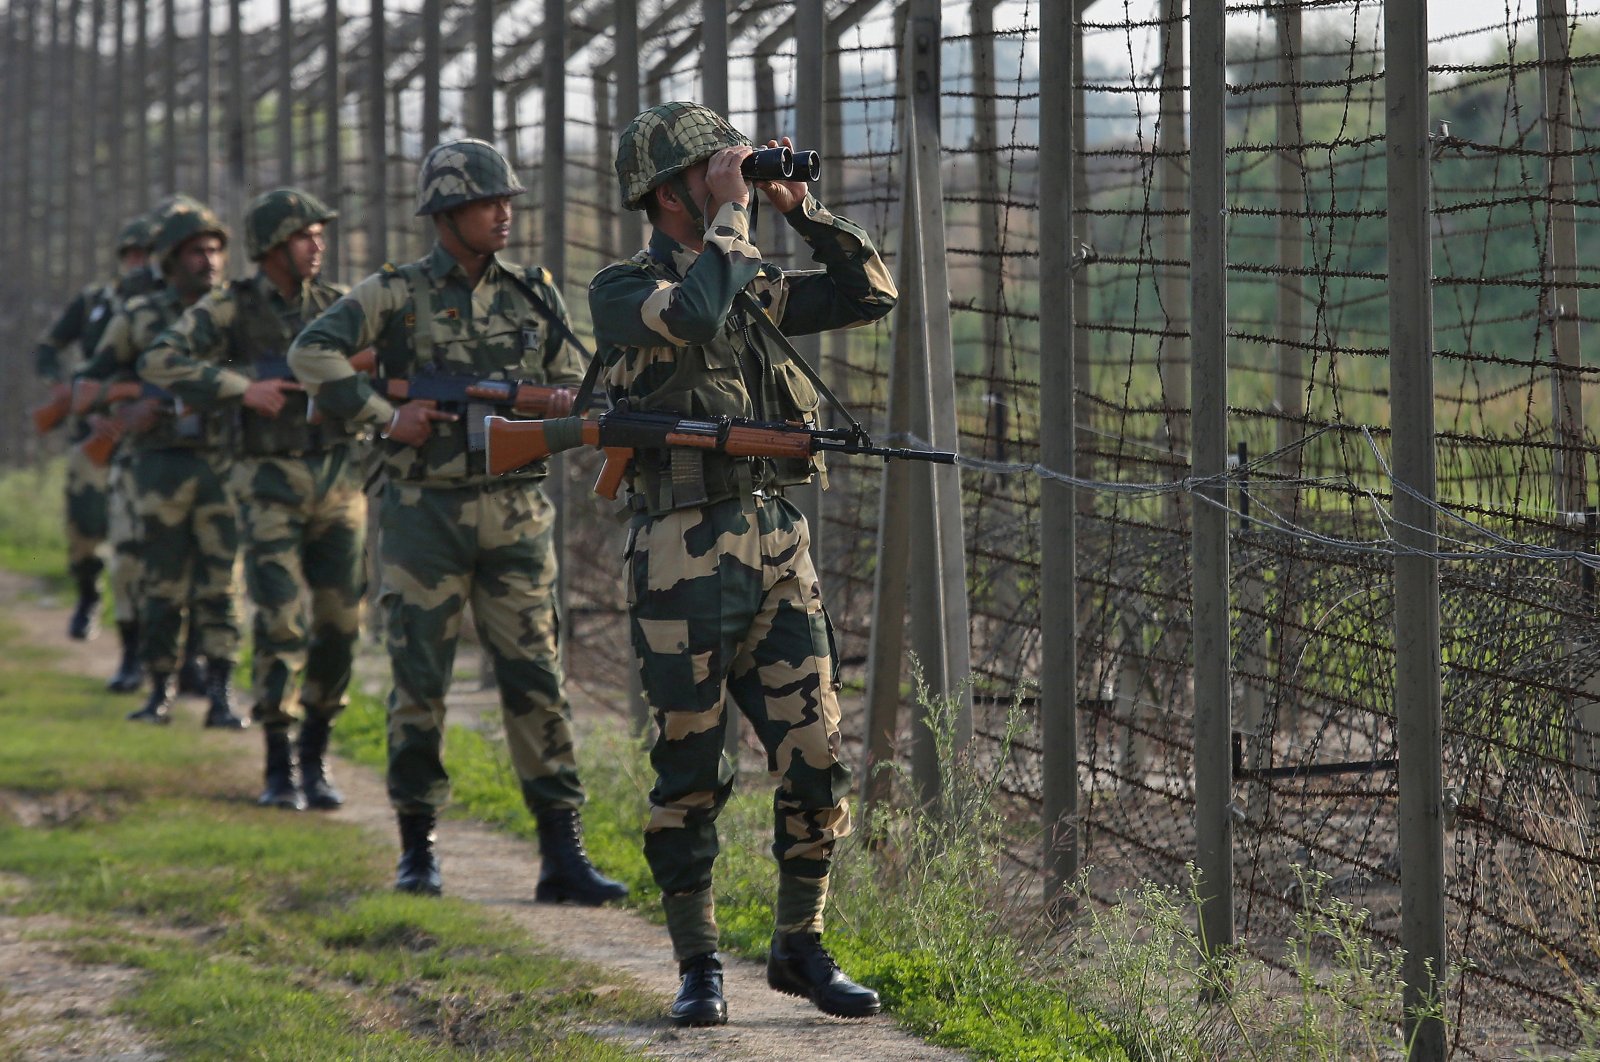 India's Border Security Force soldiers patrol along the fenced border with Pakistan in the Ranbir Singh Pura sector near Jammu, Feb. 26, 2019. (Reuters Photo)